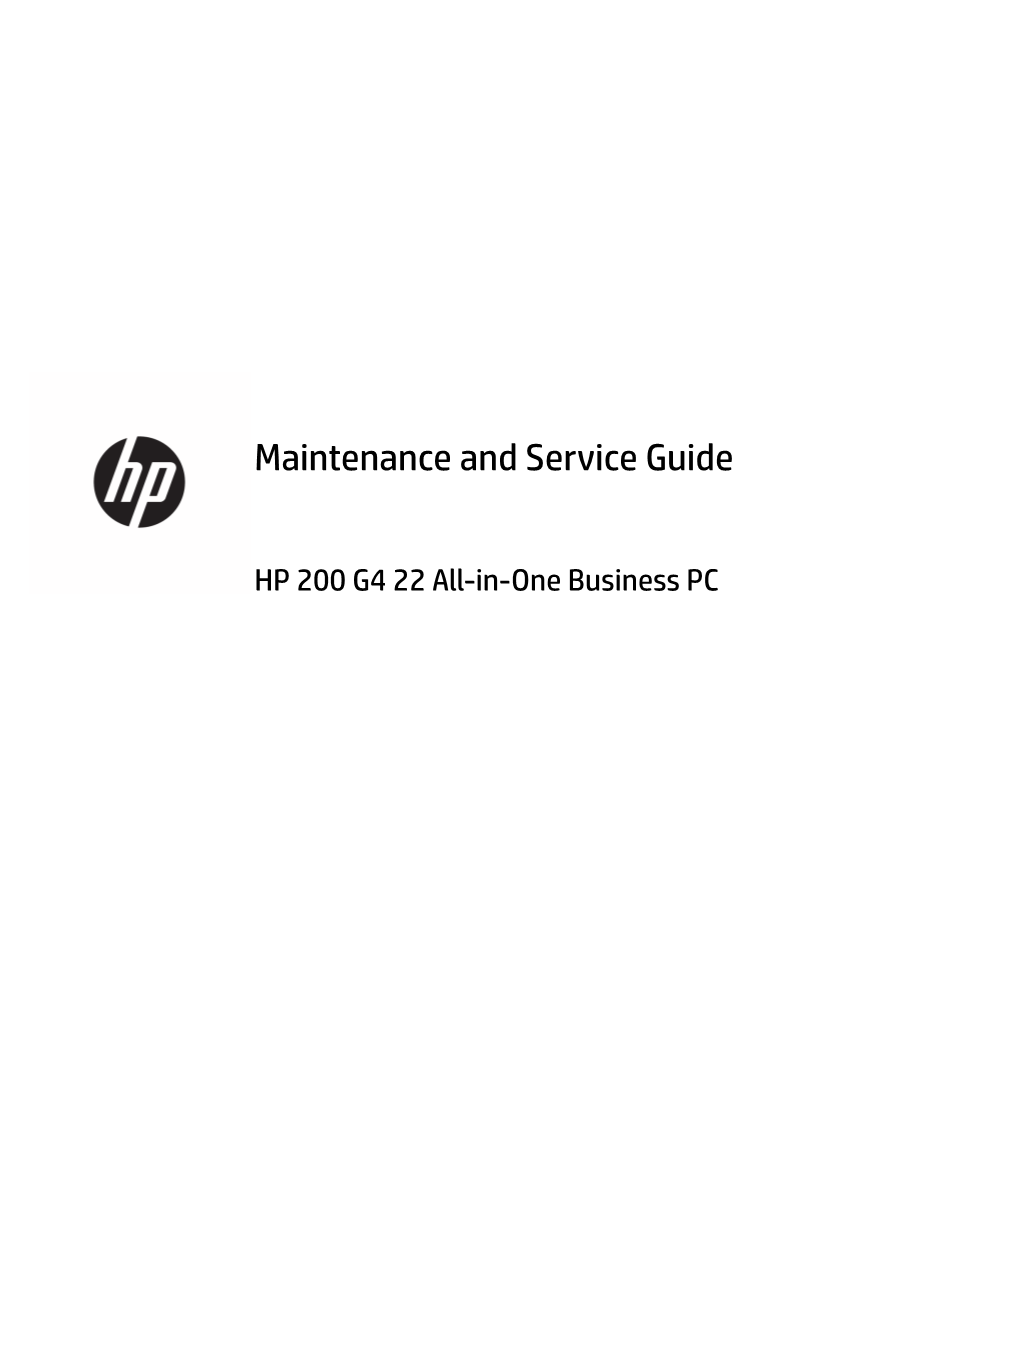 Maintenance and Service Guide HP 200 G4 22 All-In-One Business PC